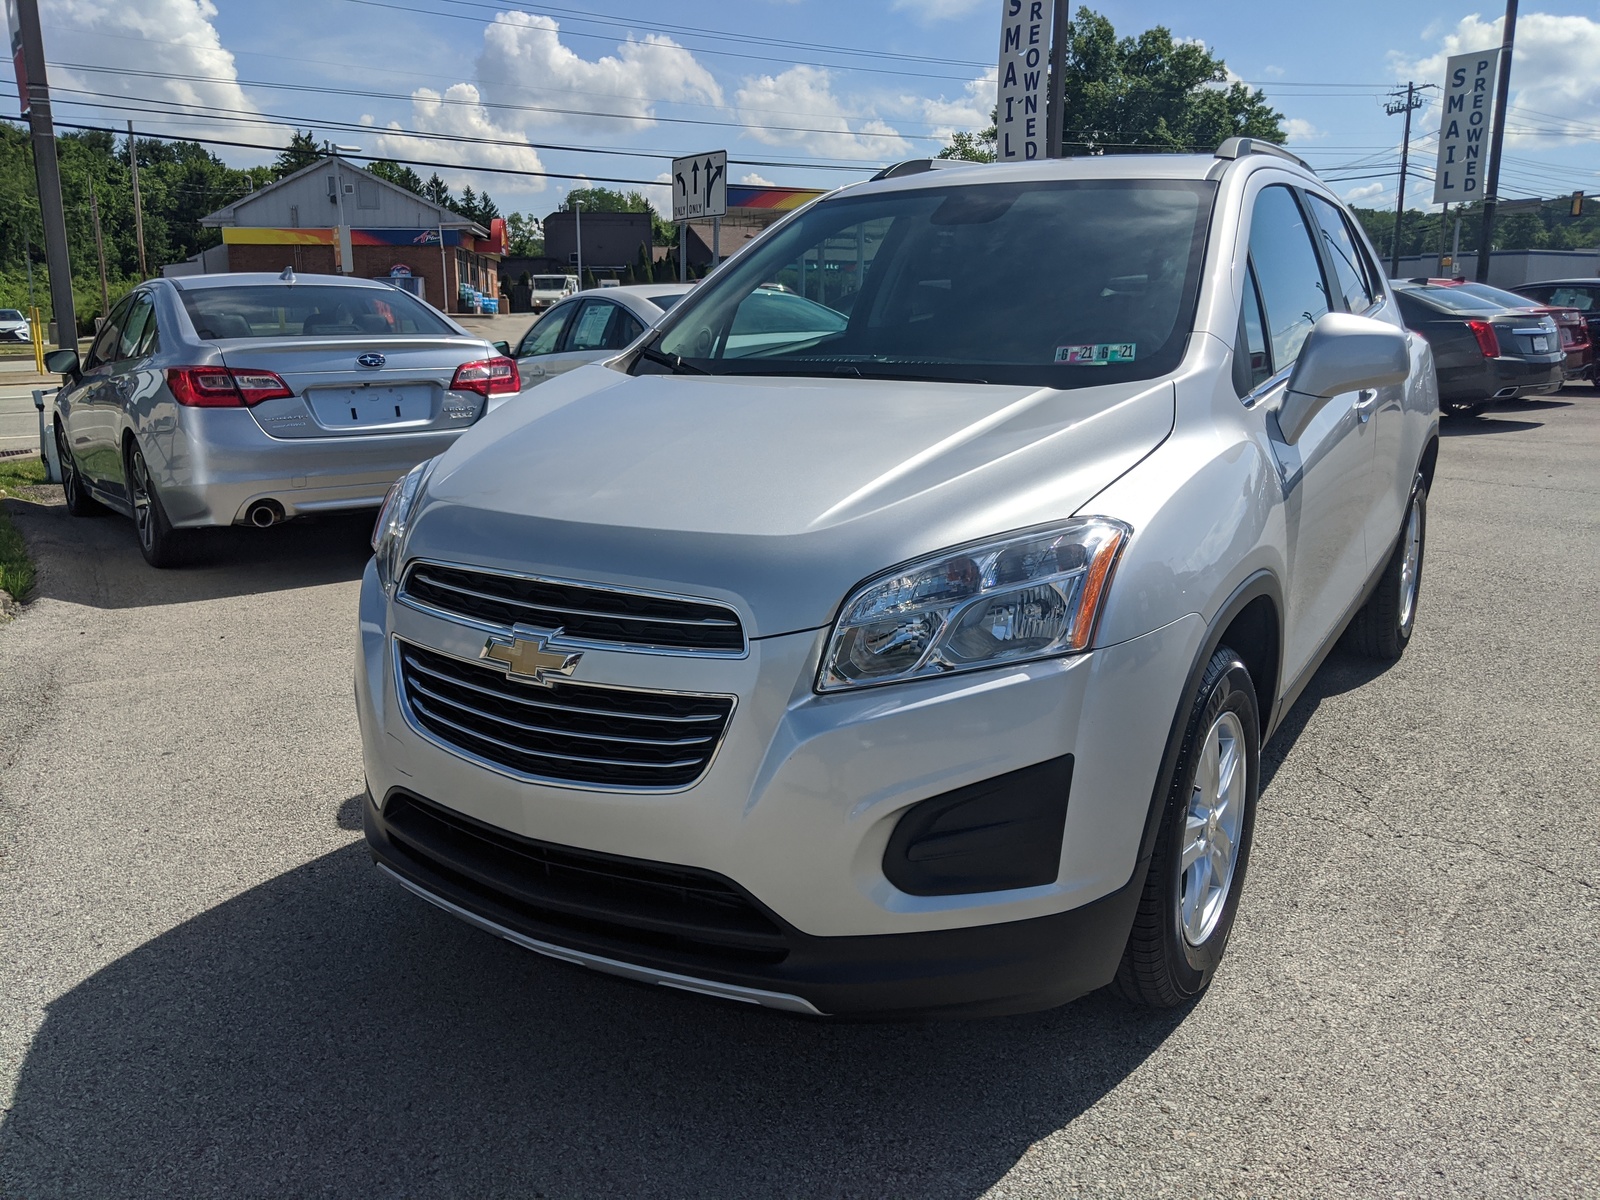 2016 chevy trax awd hows it work